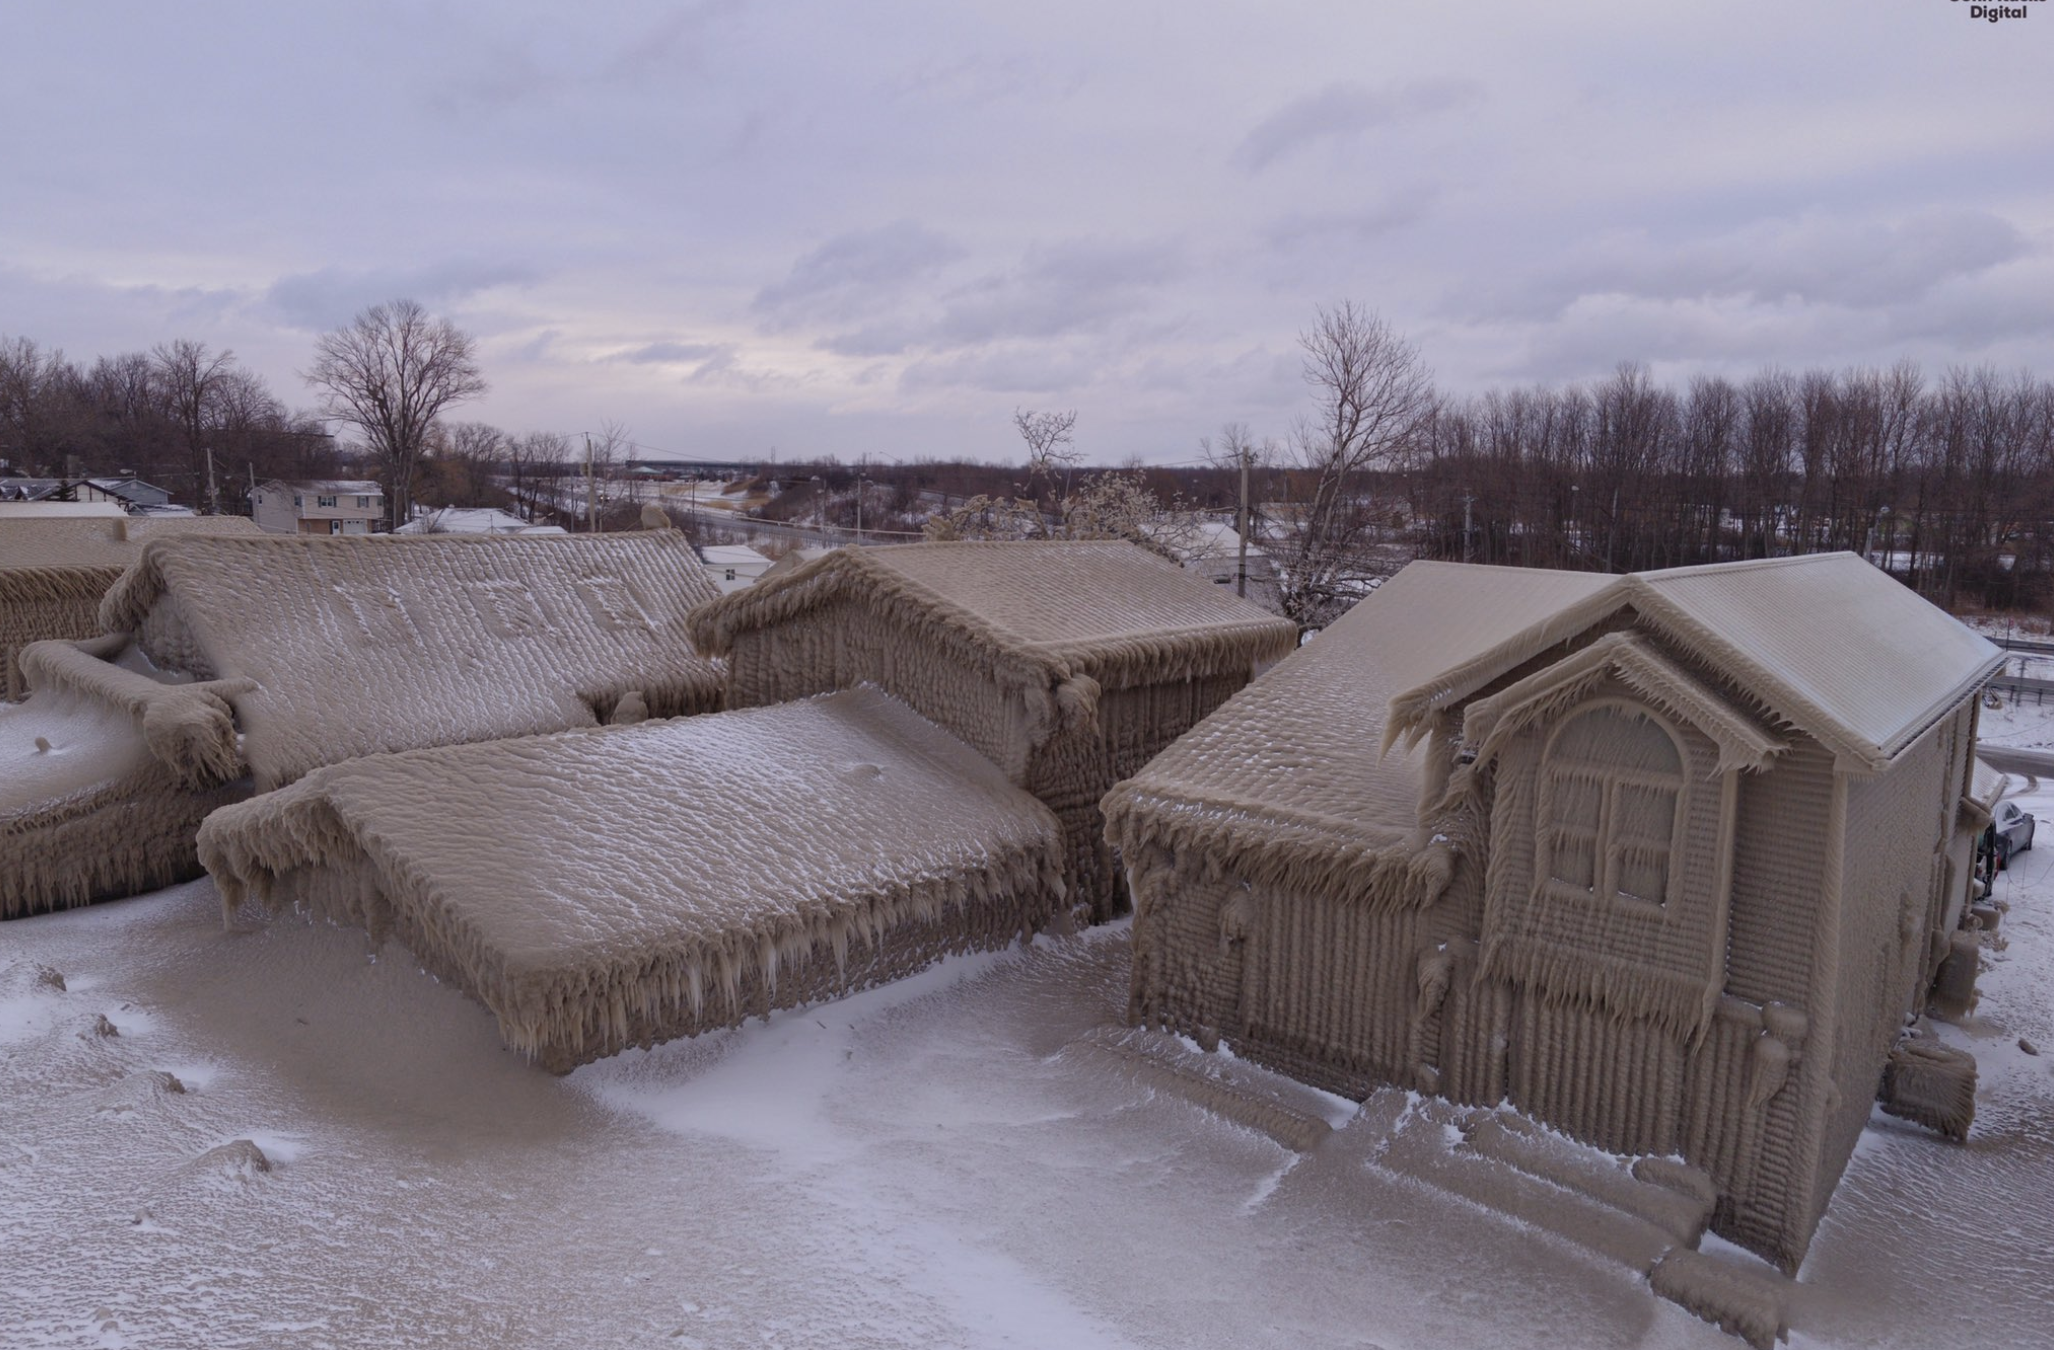 Hamburg Ny Homes Are Covered In Ice By Massive Lake Erie Waves